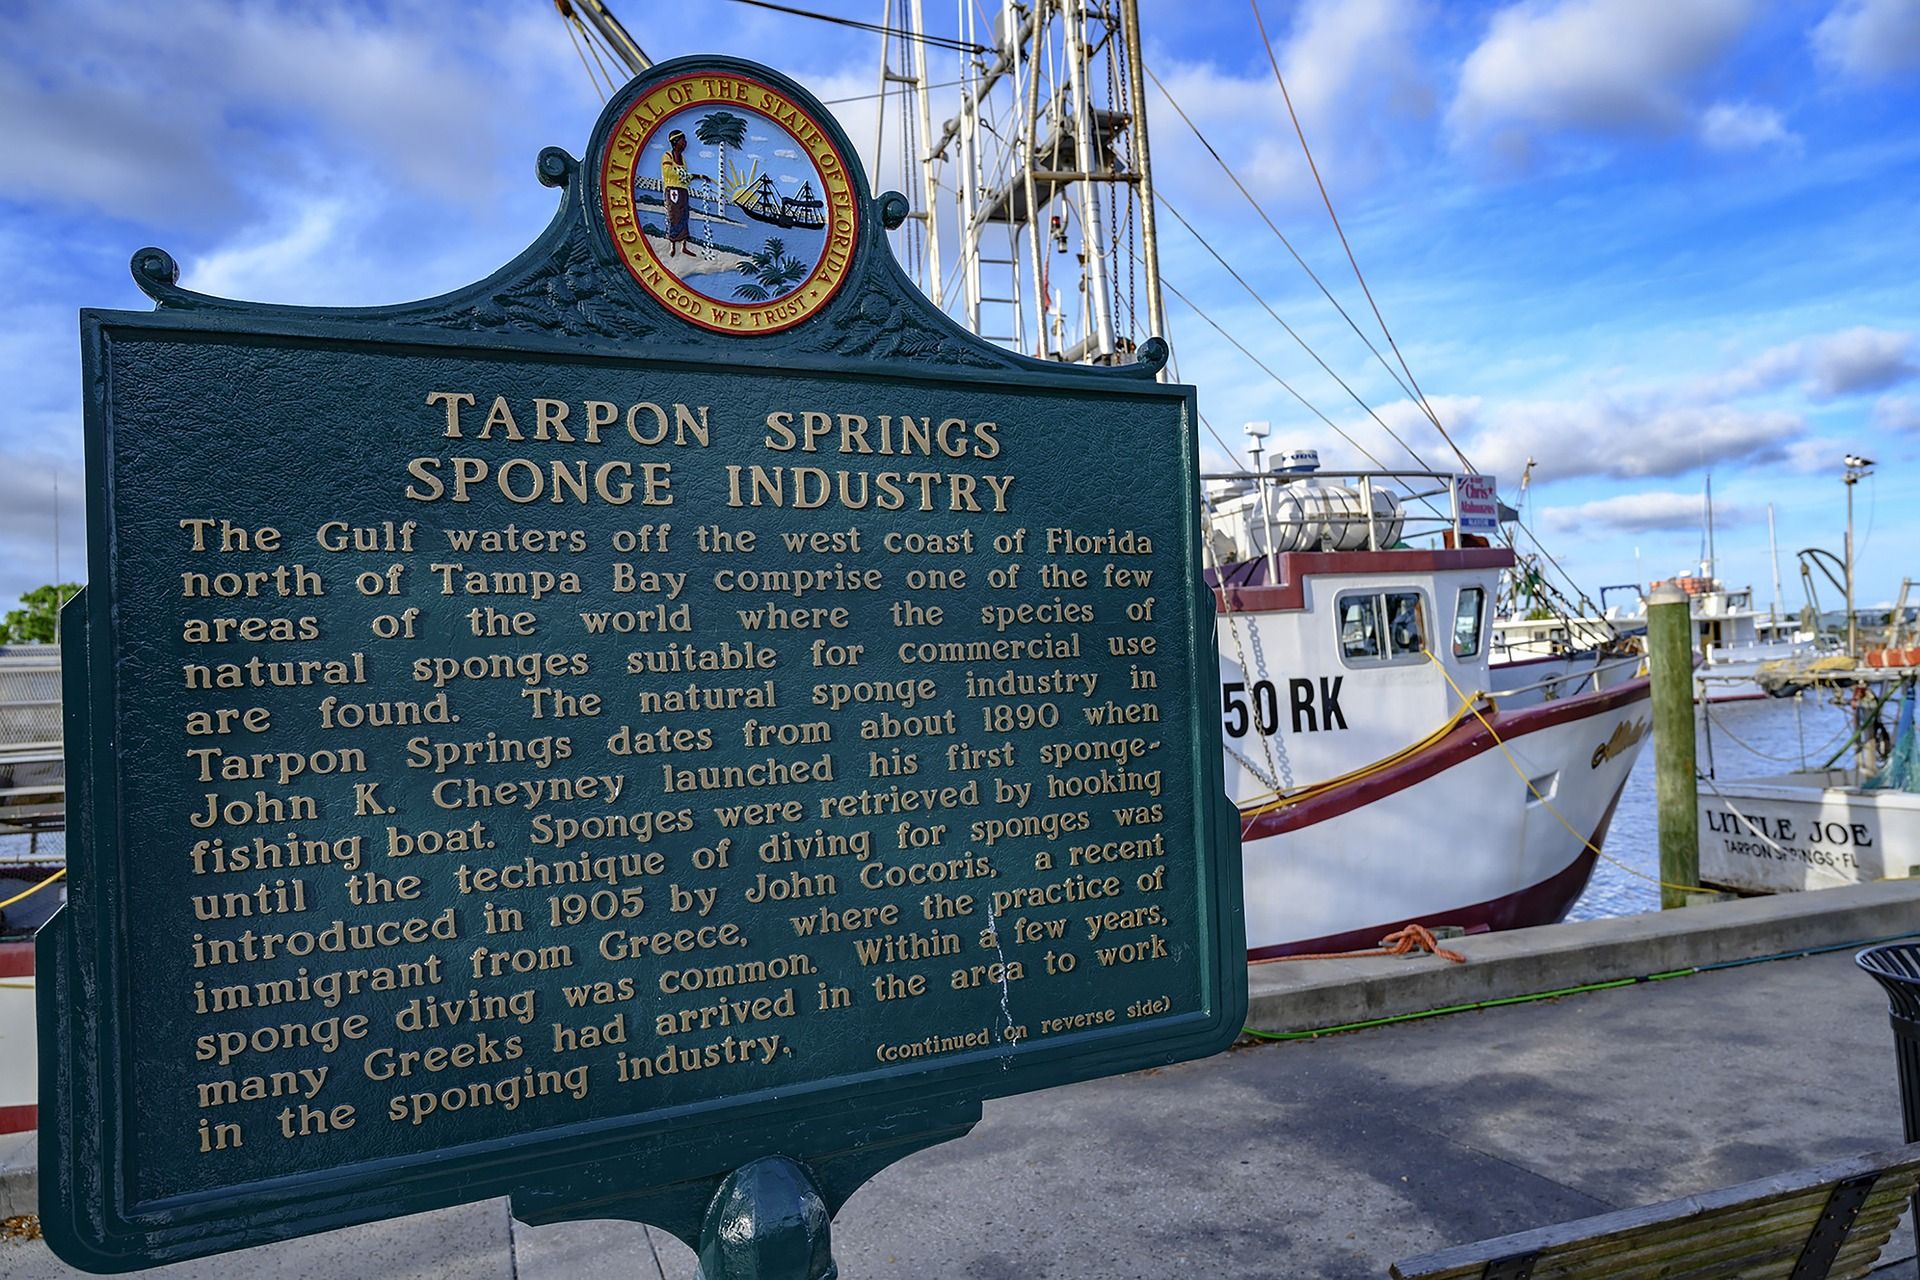 A sign documenting history at Tarpon Springs dock in Florida